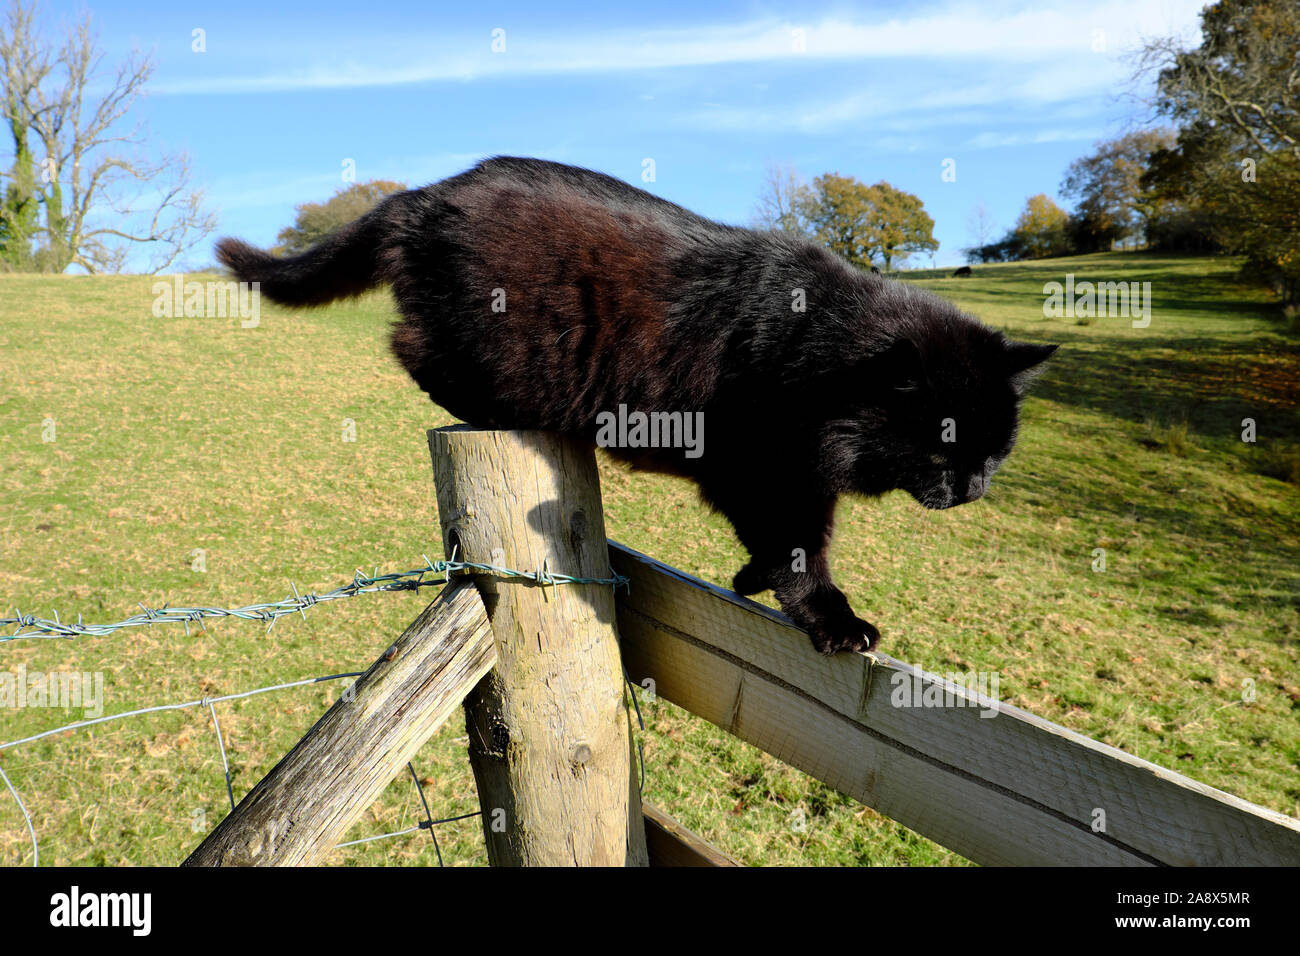 Black Norwegian Forest cat walking on a wooden fence on a sunny November day in the countryside Carmarthenshire Wales UK  KATHY DEWITT Stock Photo